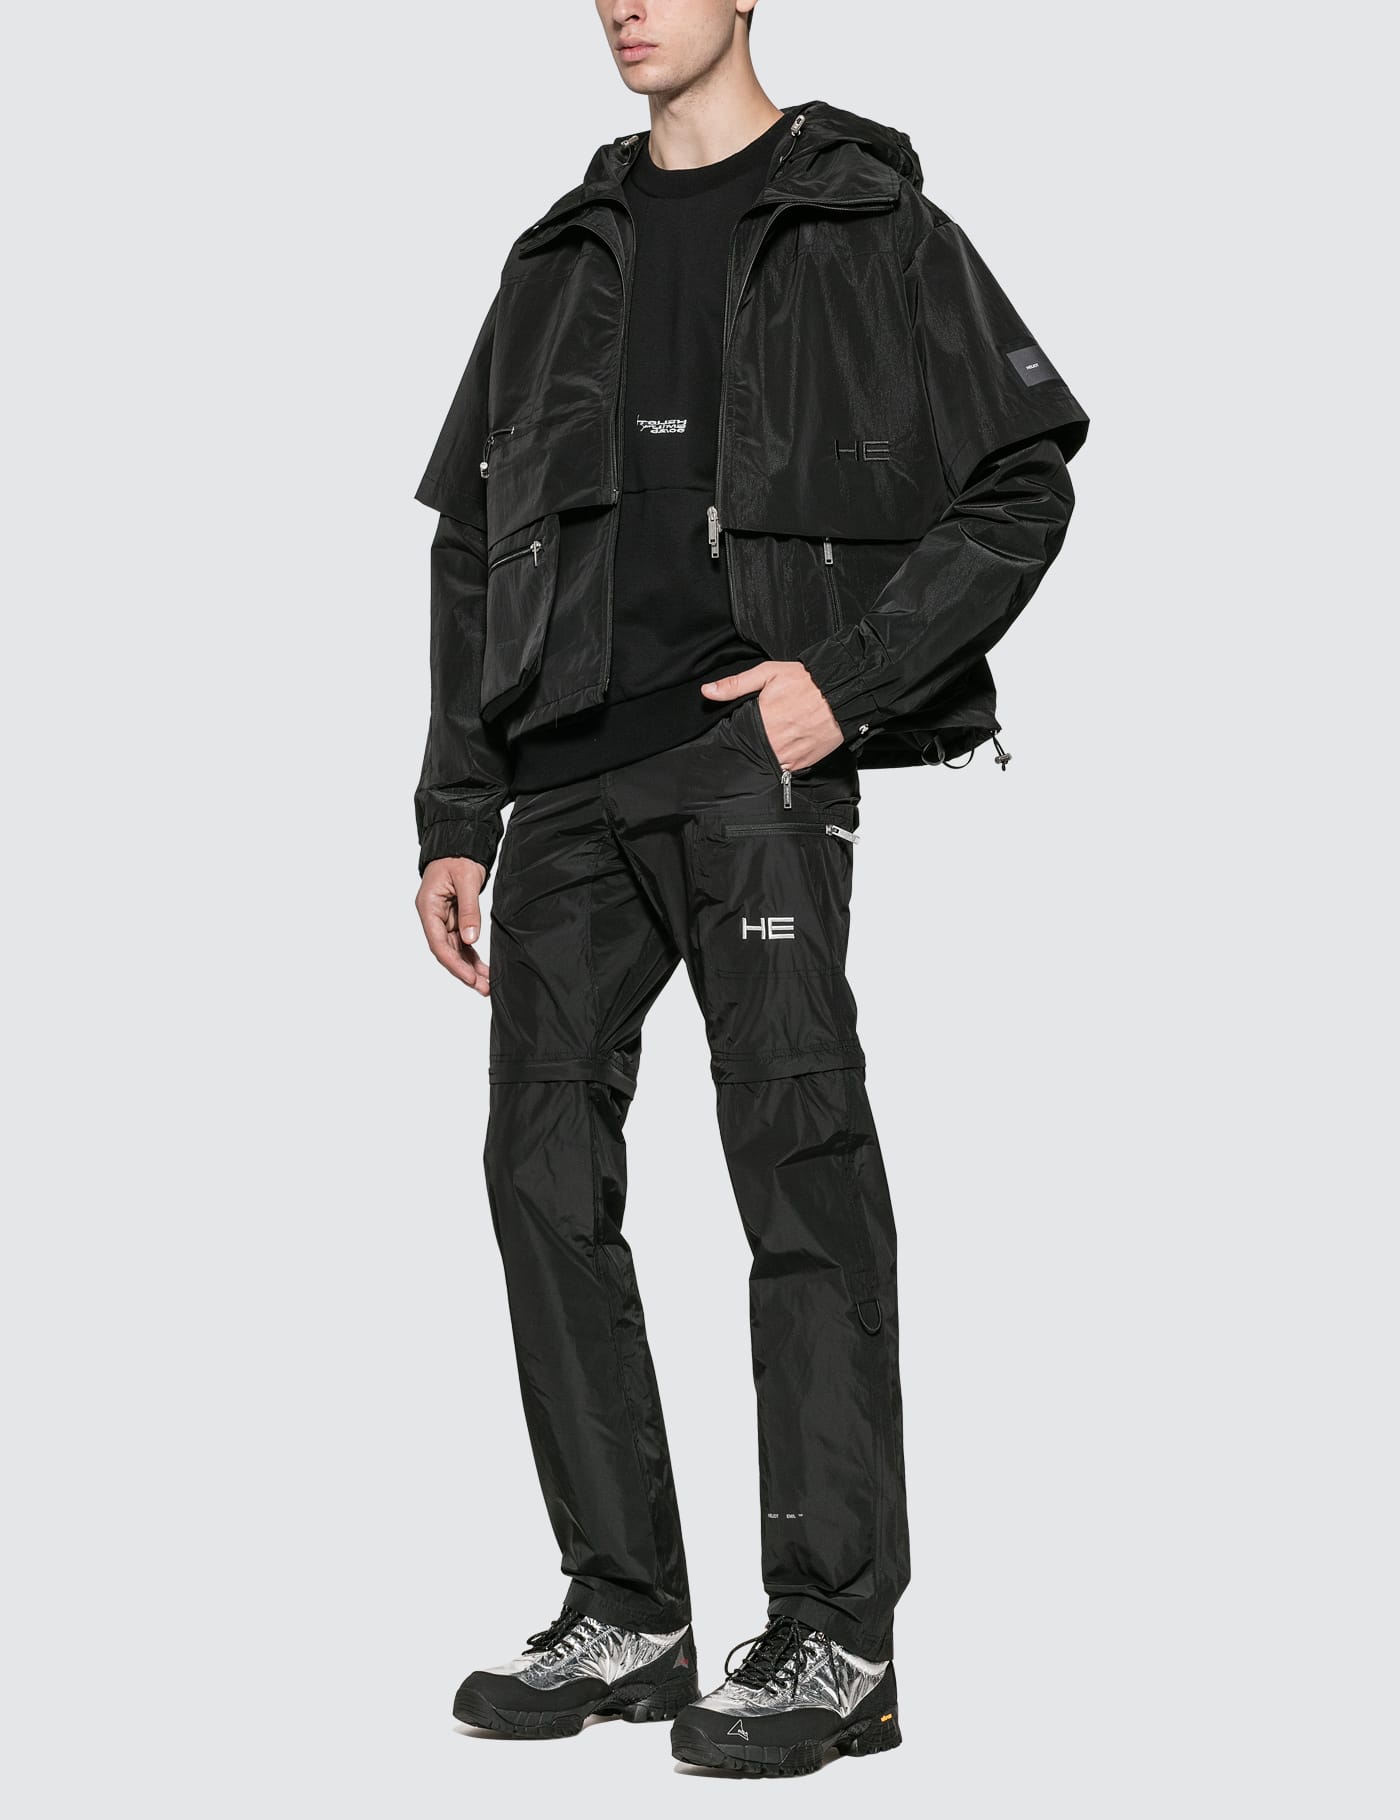 Heliot Emil - Technical Jacket | HBX - Globally Curated Fashion